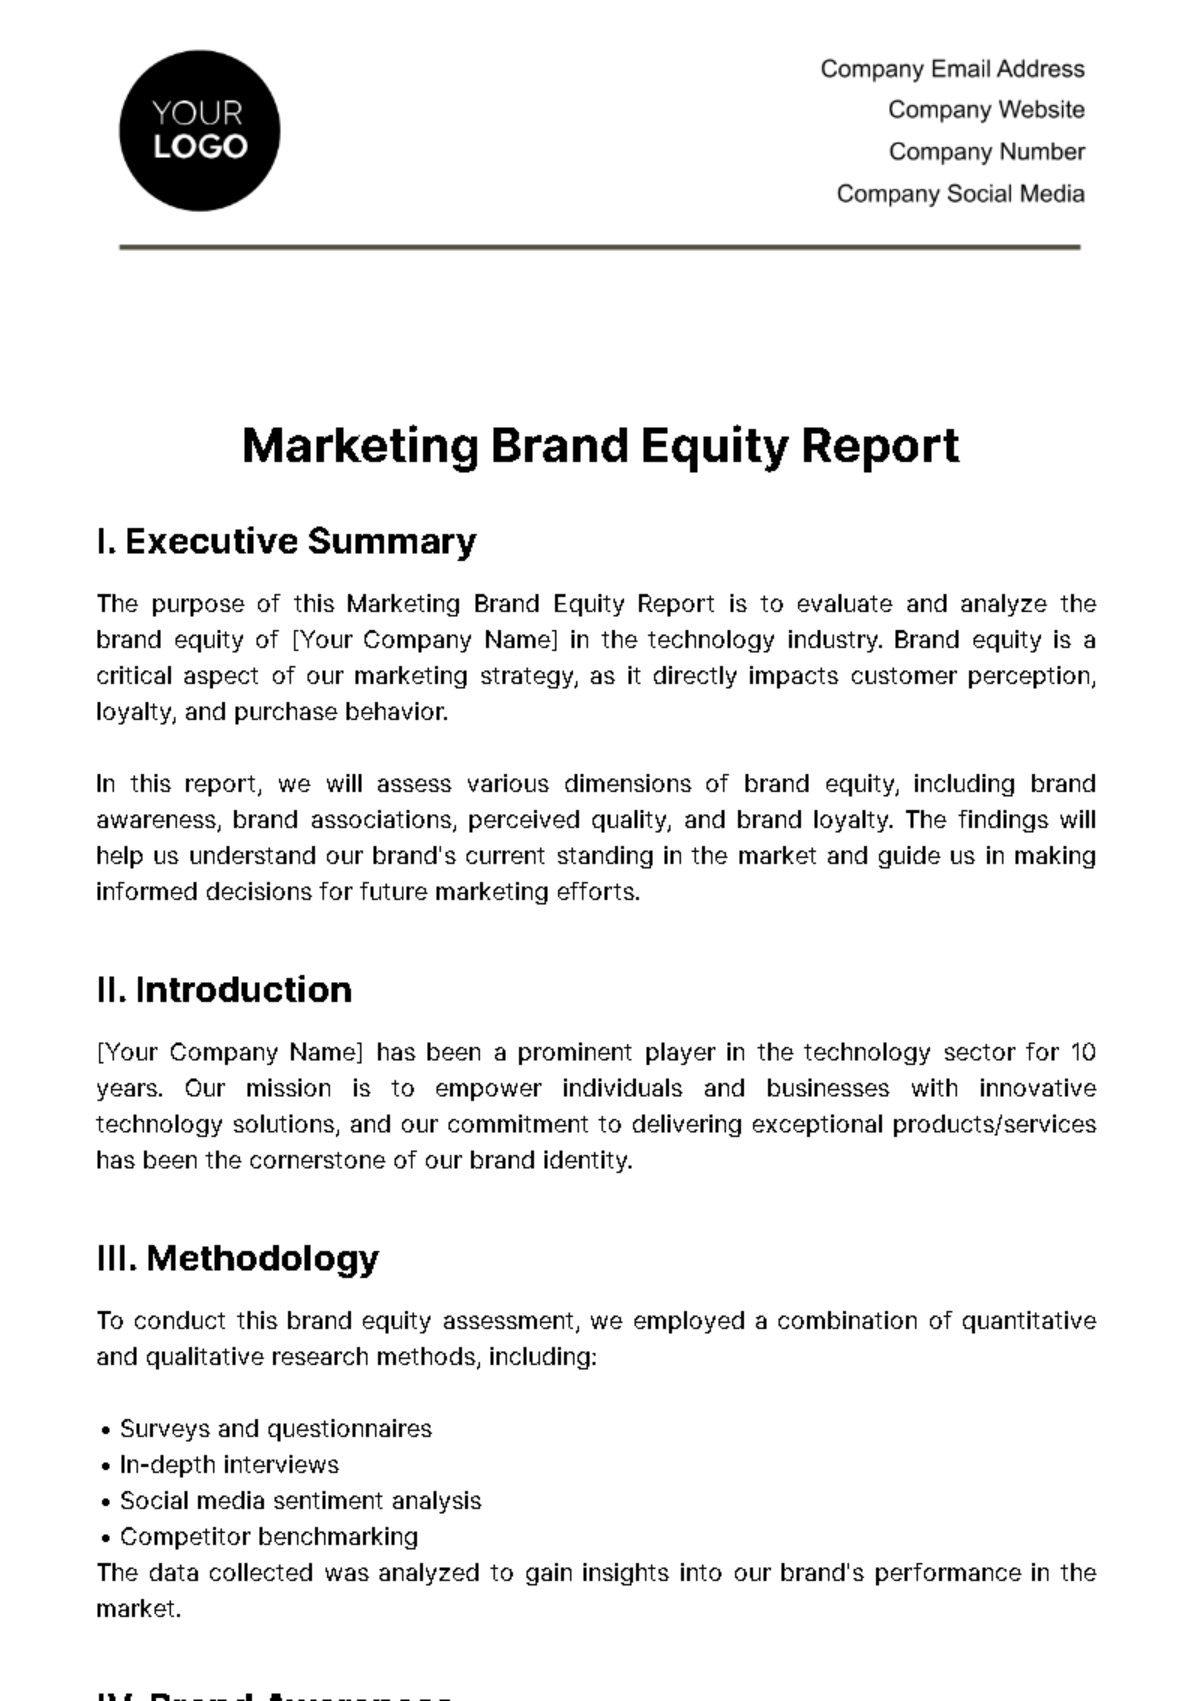 Marketing Brand Equity Report Template